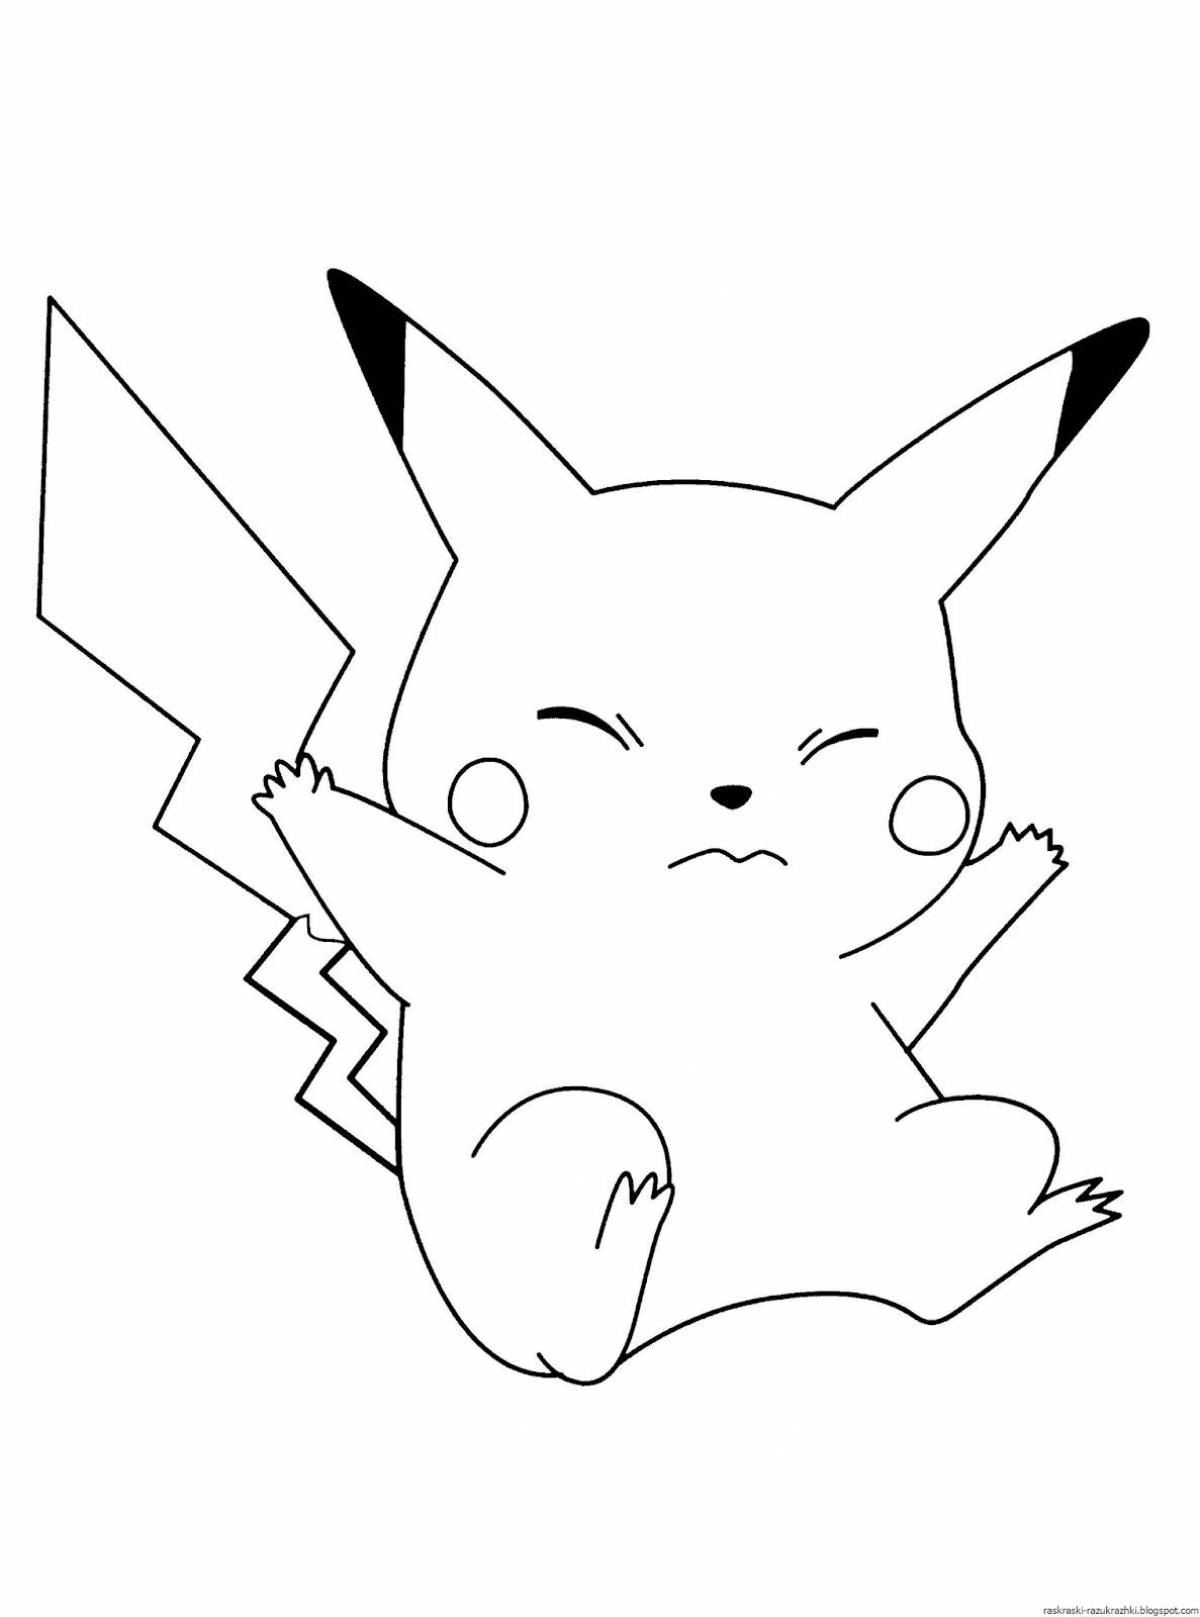 Pikachu funny coloring book